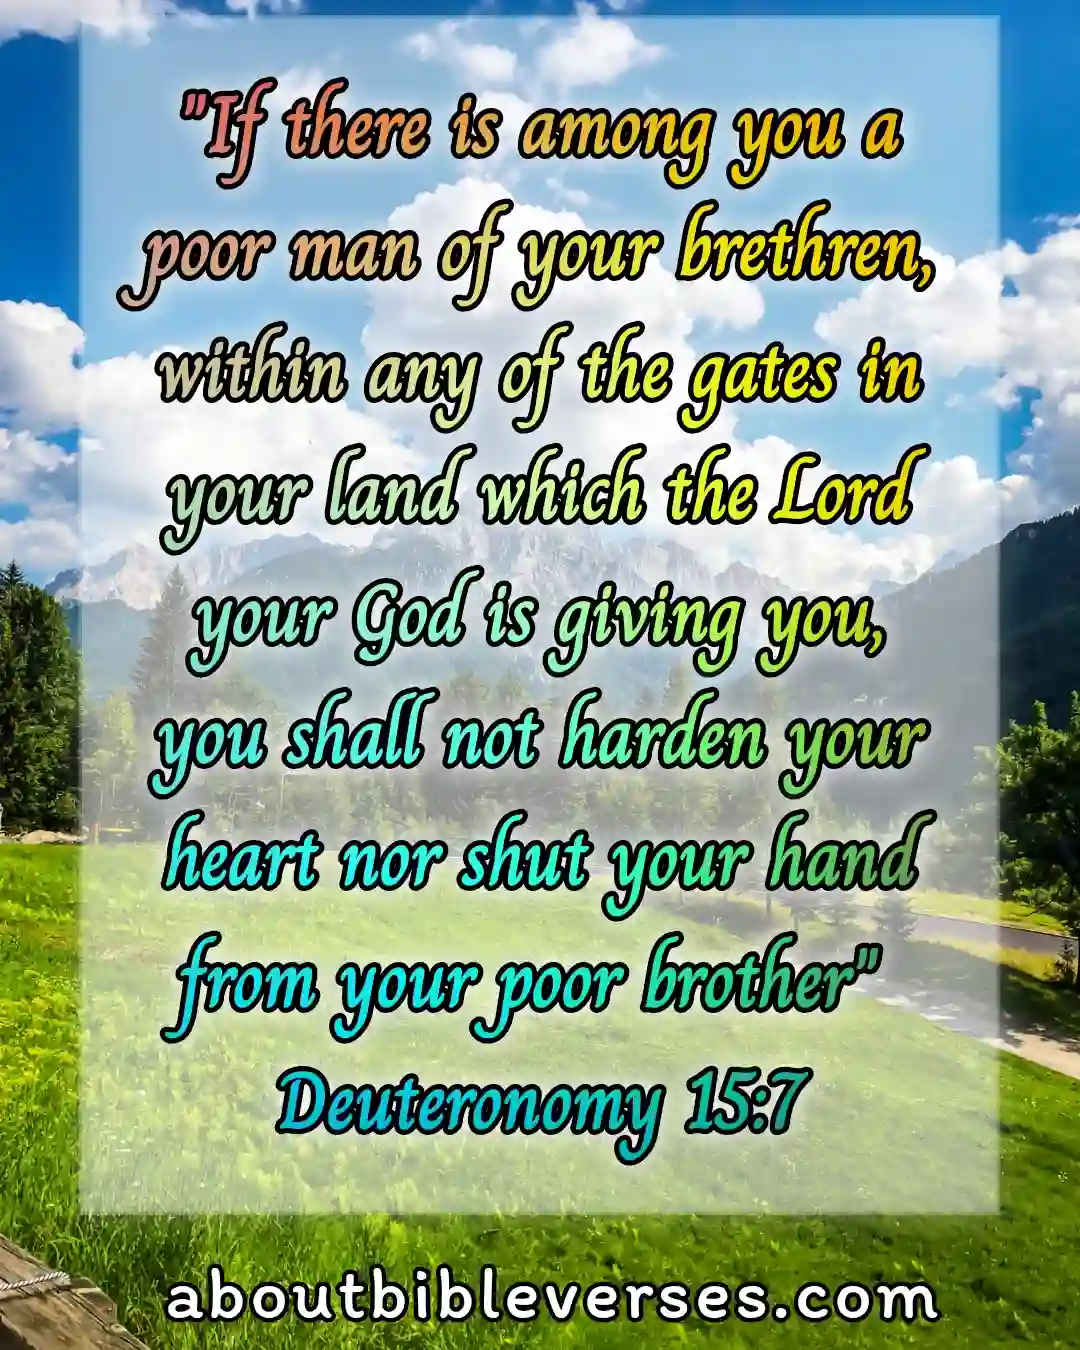 bible verses Helping To others (Deuteronomy 15:7)